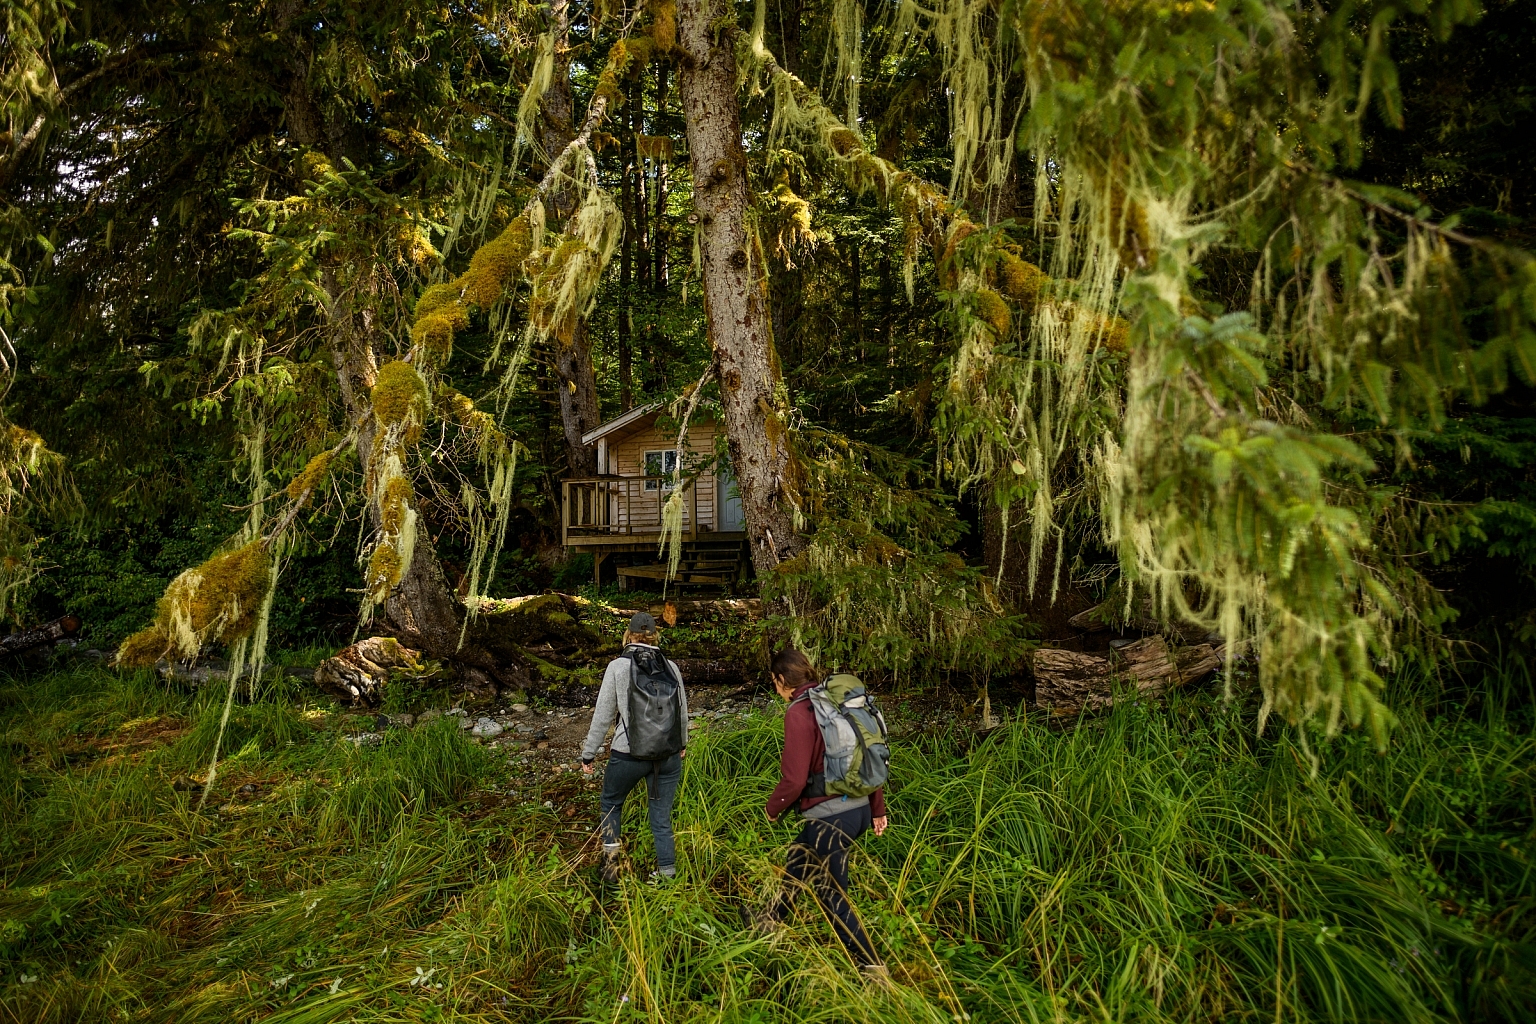 Two hikers walk towards the Haisla Cabin at Shearwater Hot Springs Conservancy. The path is overgrown with grass and trees with moss surround the cabin.